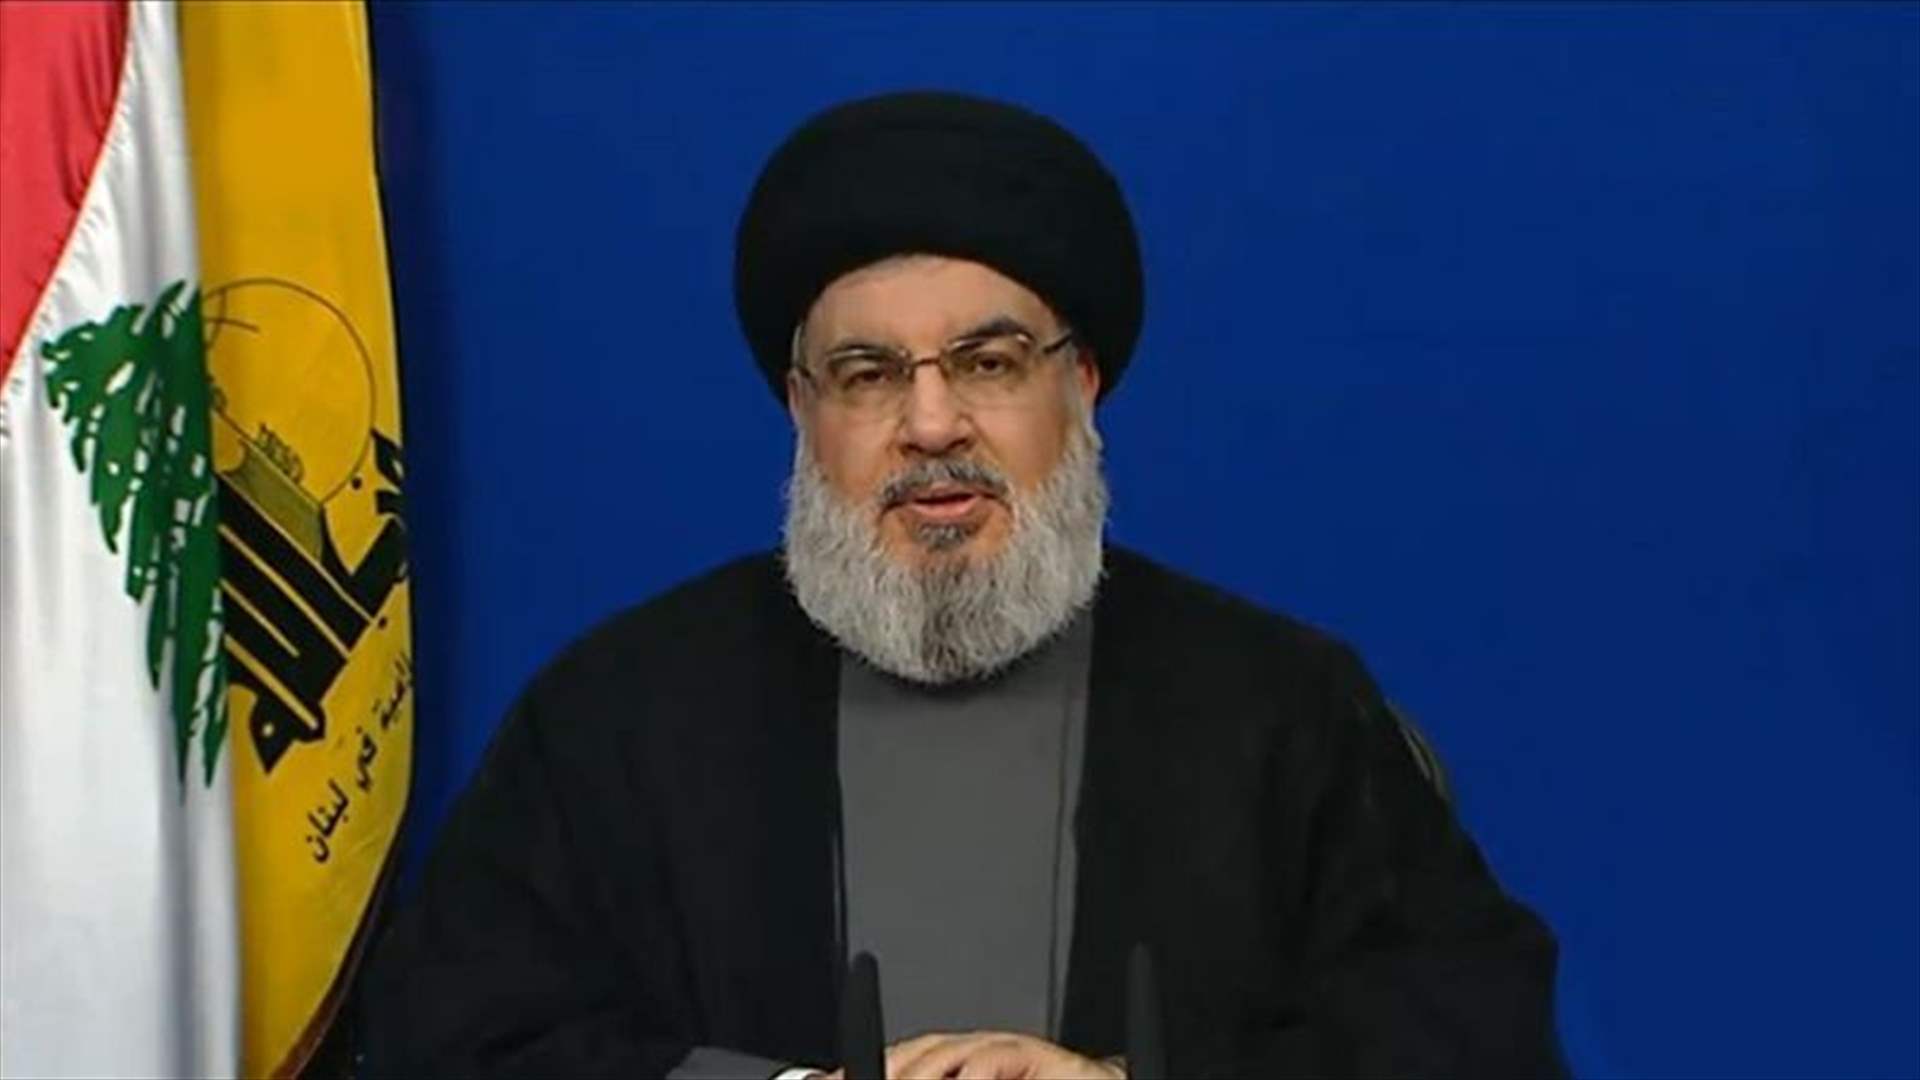 Nasrallah calls for agreement among parties as sole solution for Lebanon, stresses non-imposition on political choices